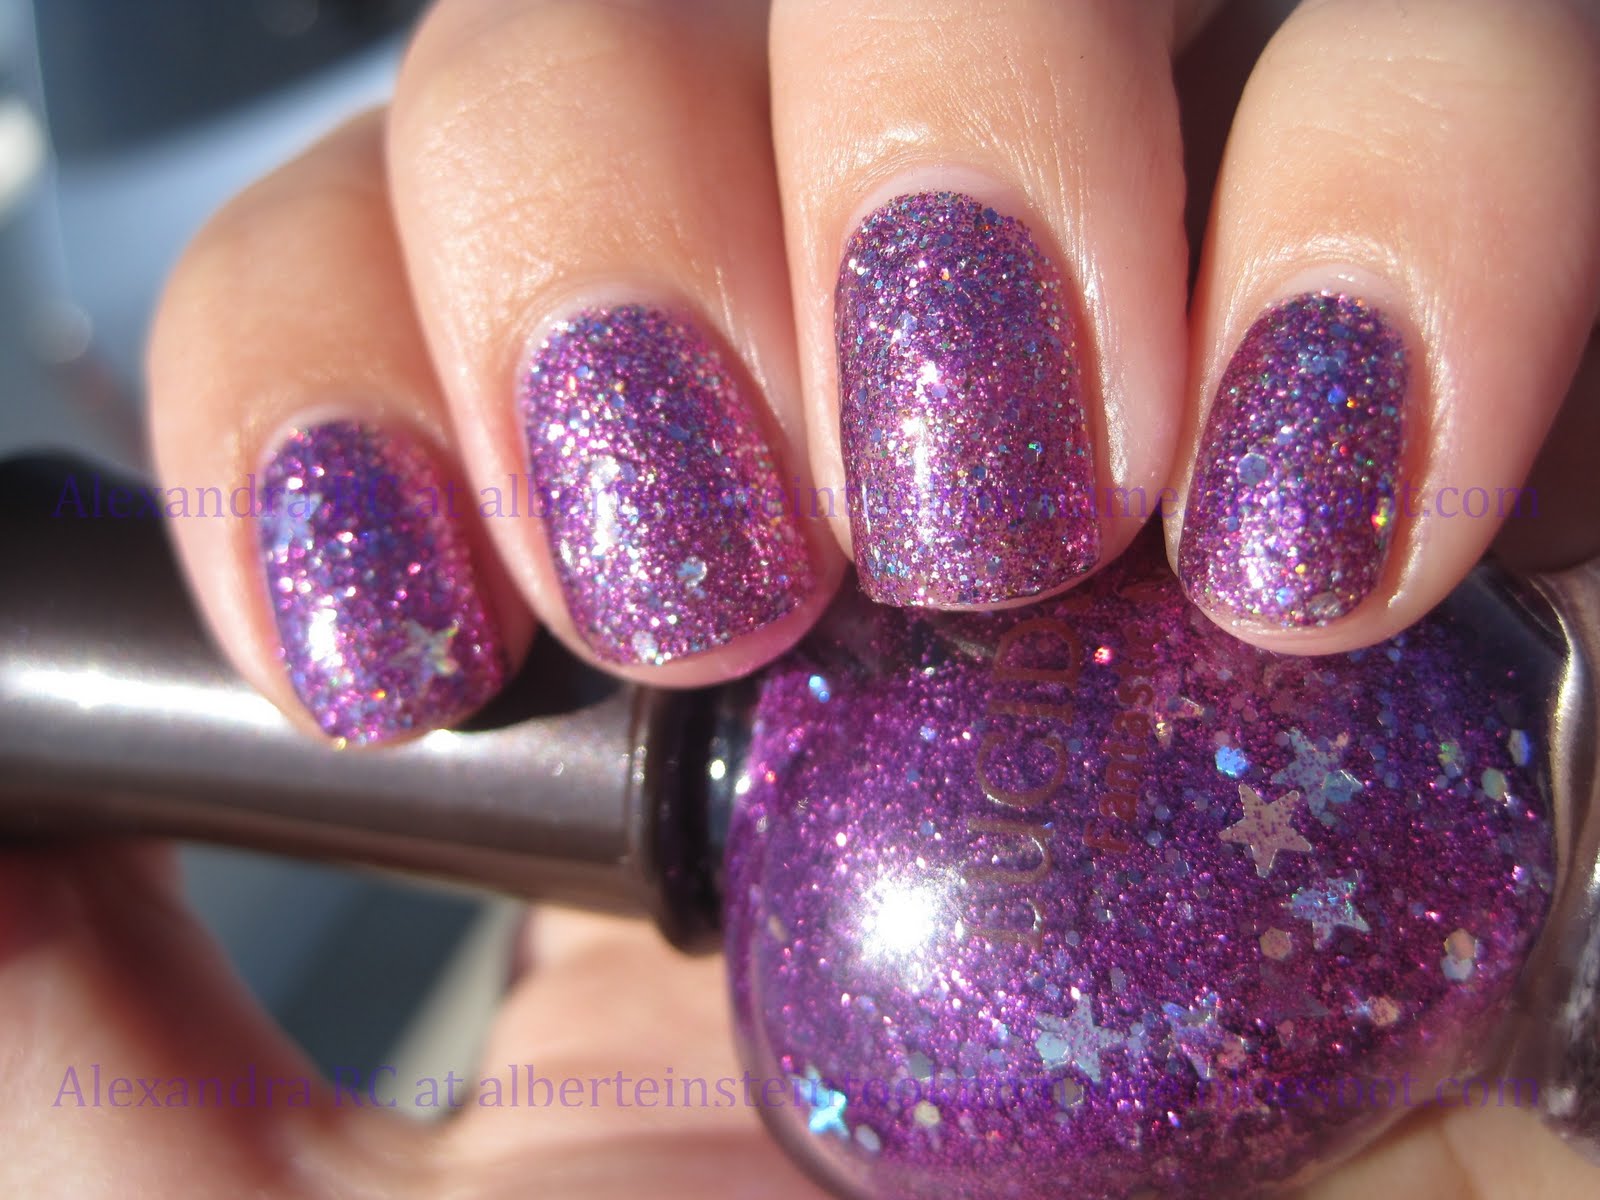 Sparkly Vernis: Etude House Lucidarling Ruby Purple glitter and more ...